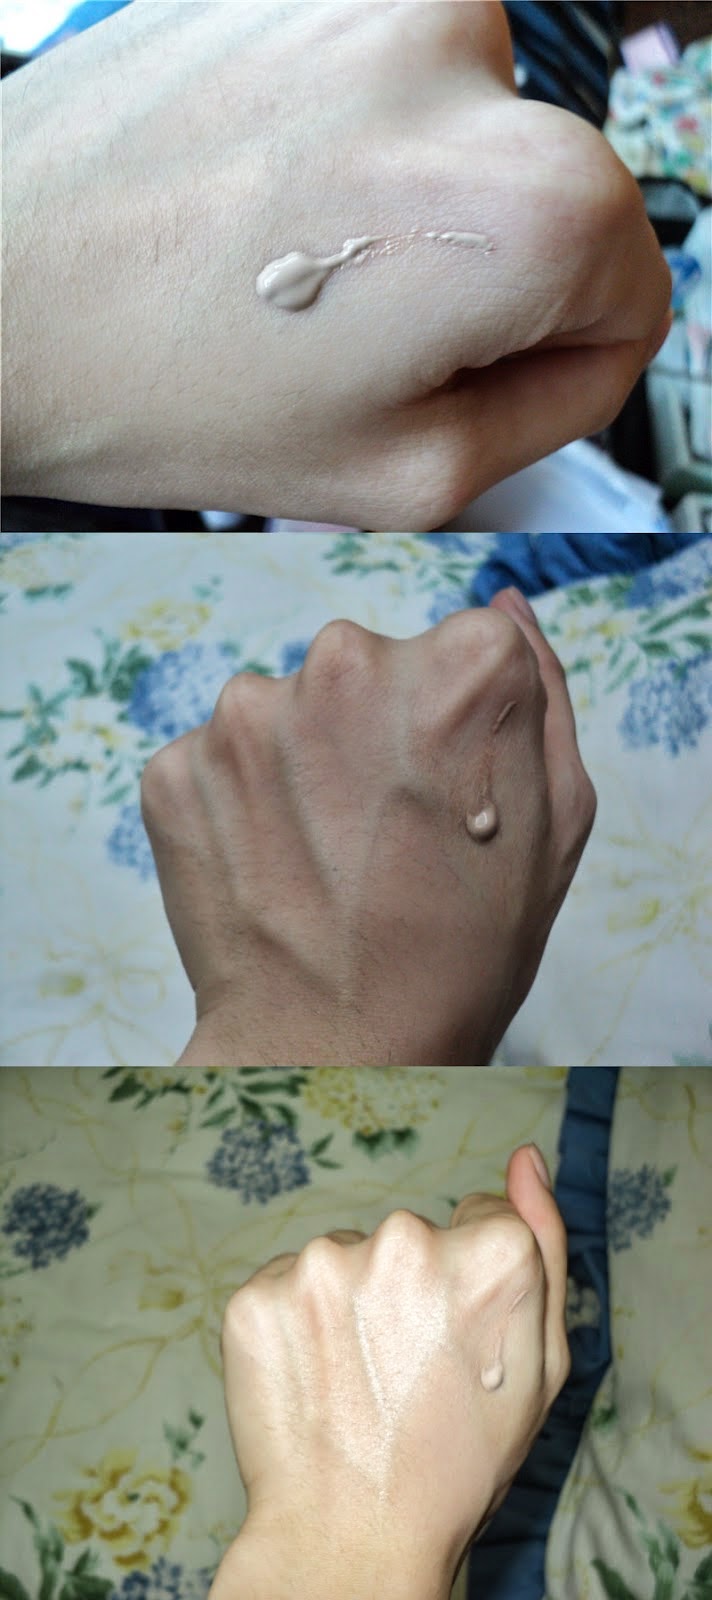 L' Oreal white perfect Transparent rosy whitening cream on my hands